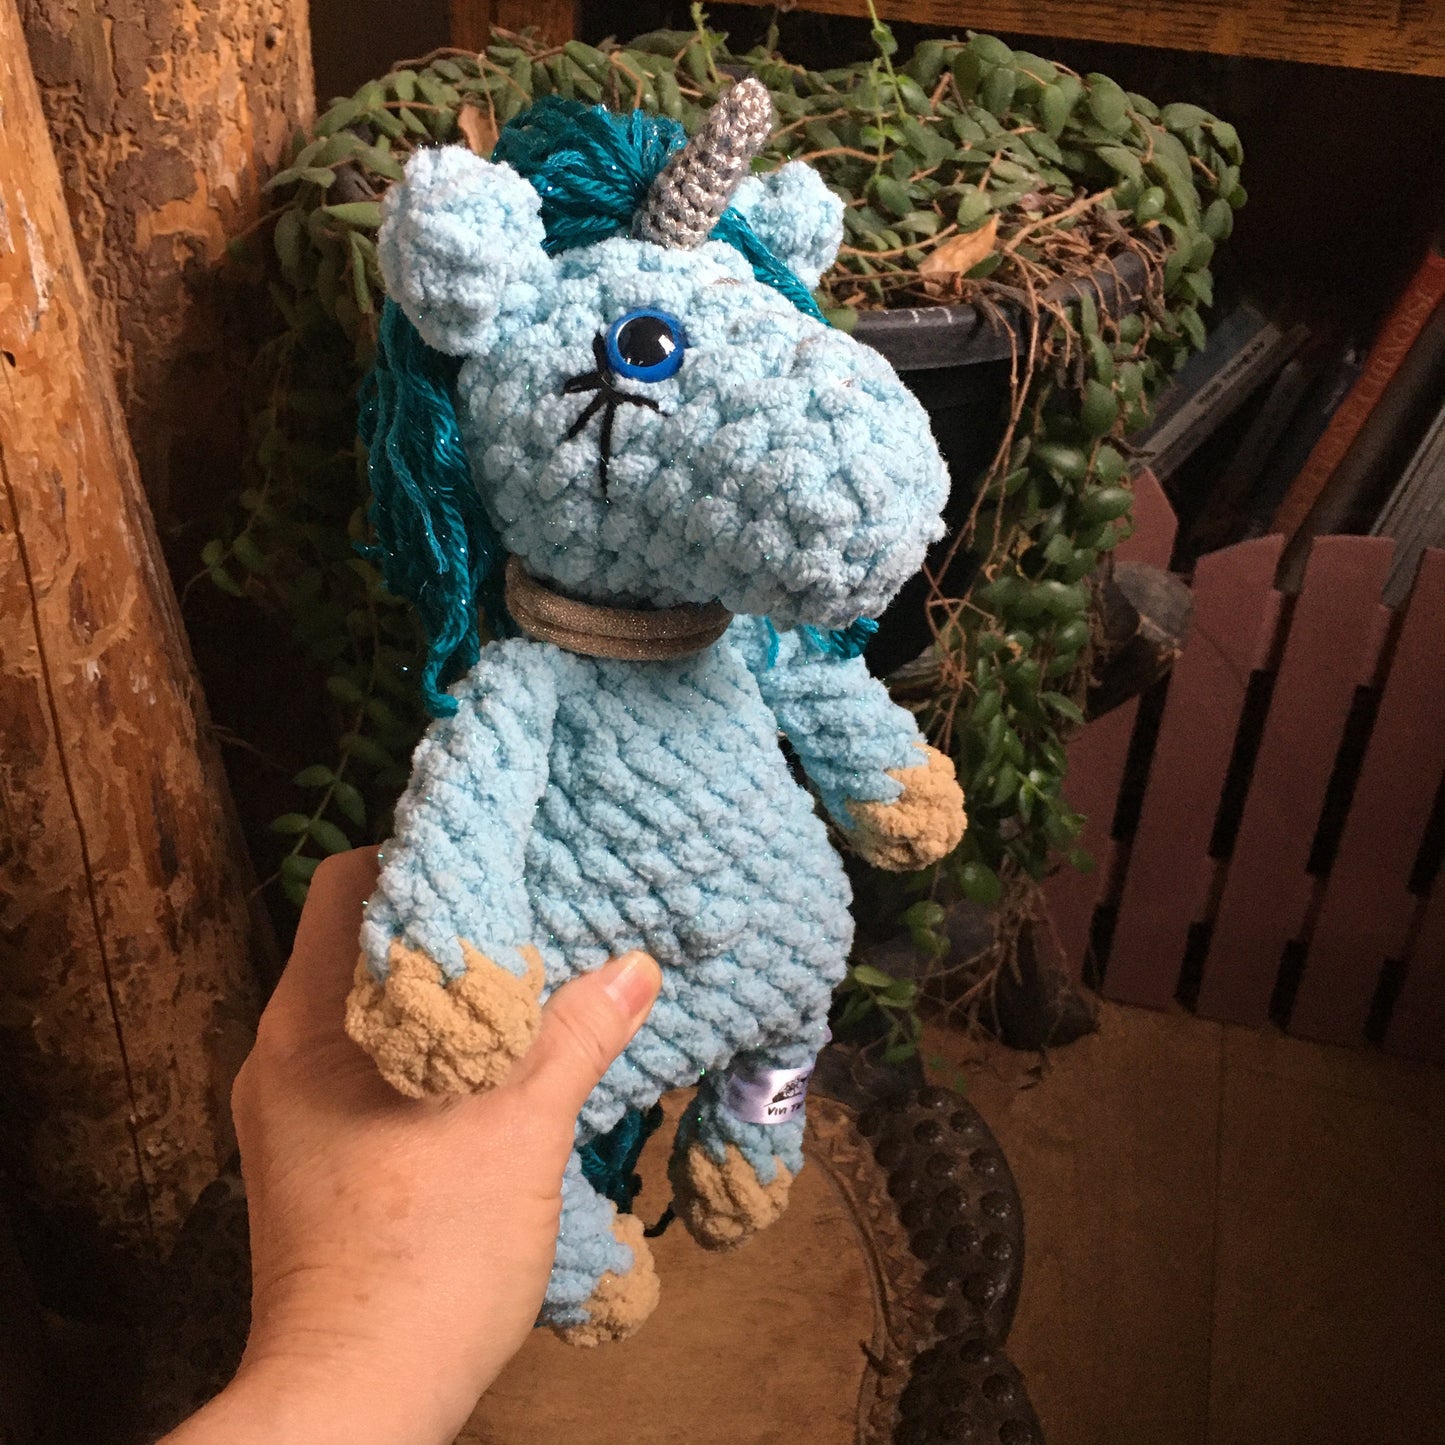 The little hair unicorn in aqua colors, plush with crochet with bling-bling sparkling wire